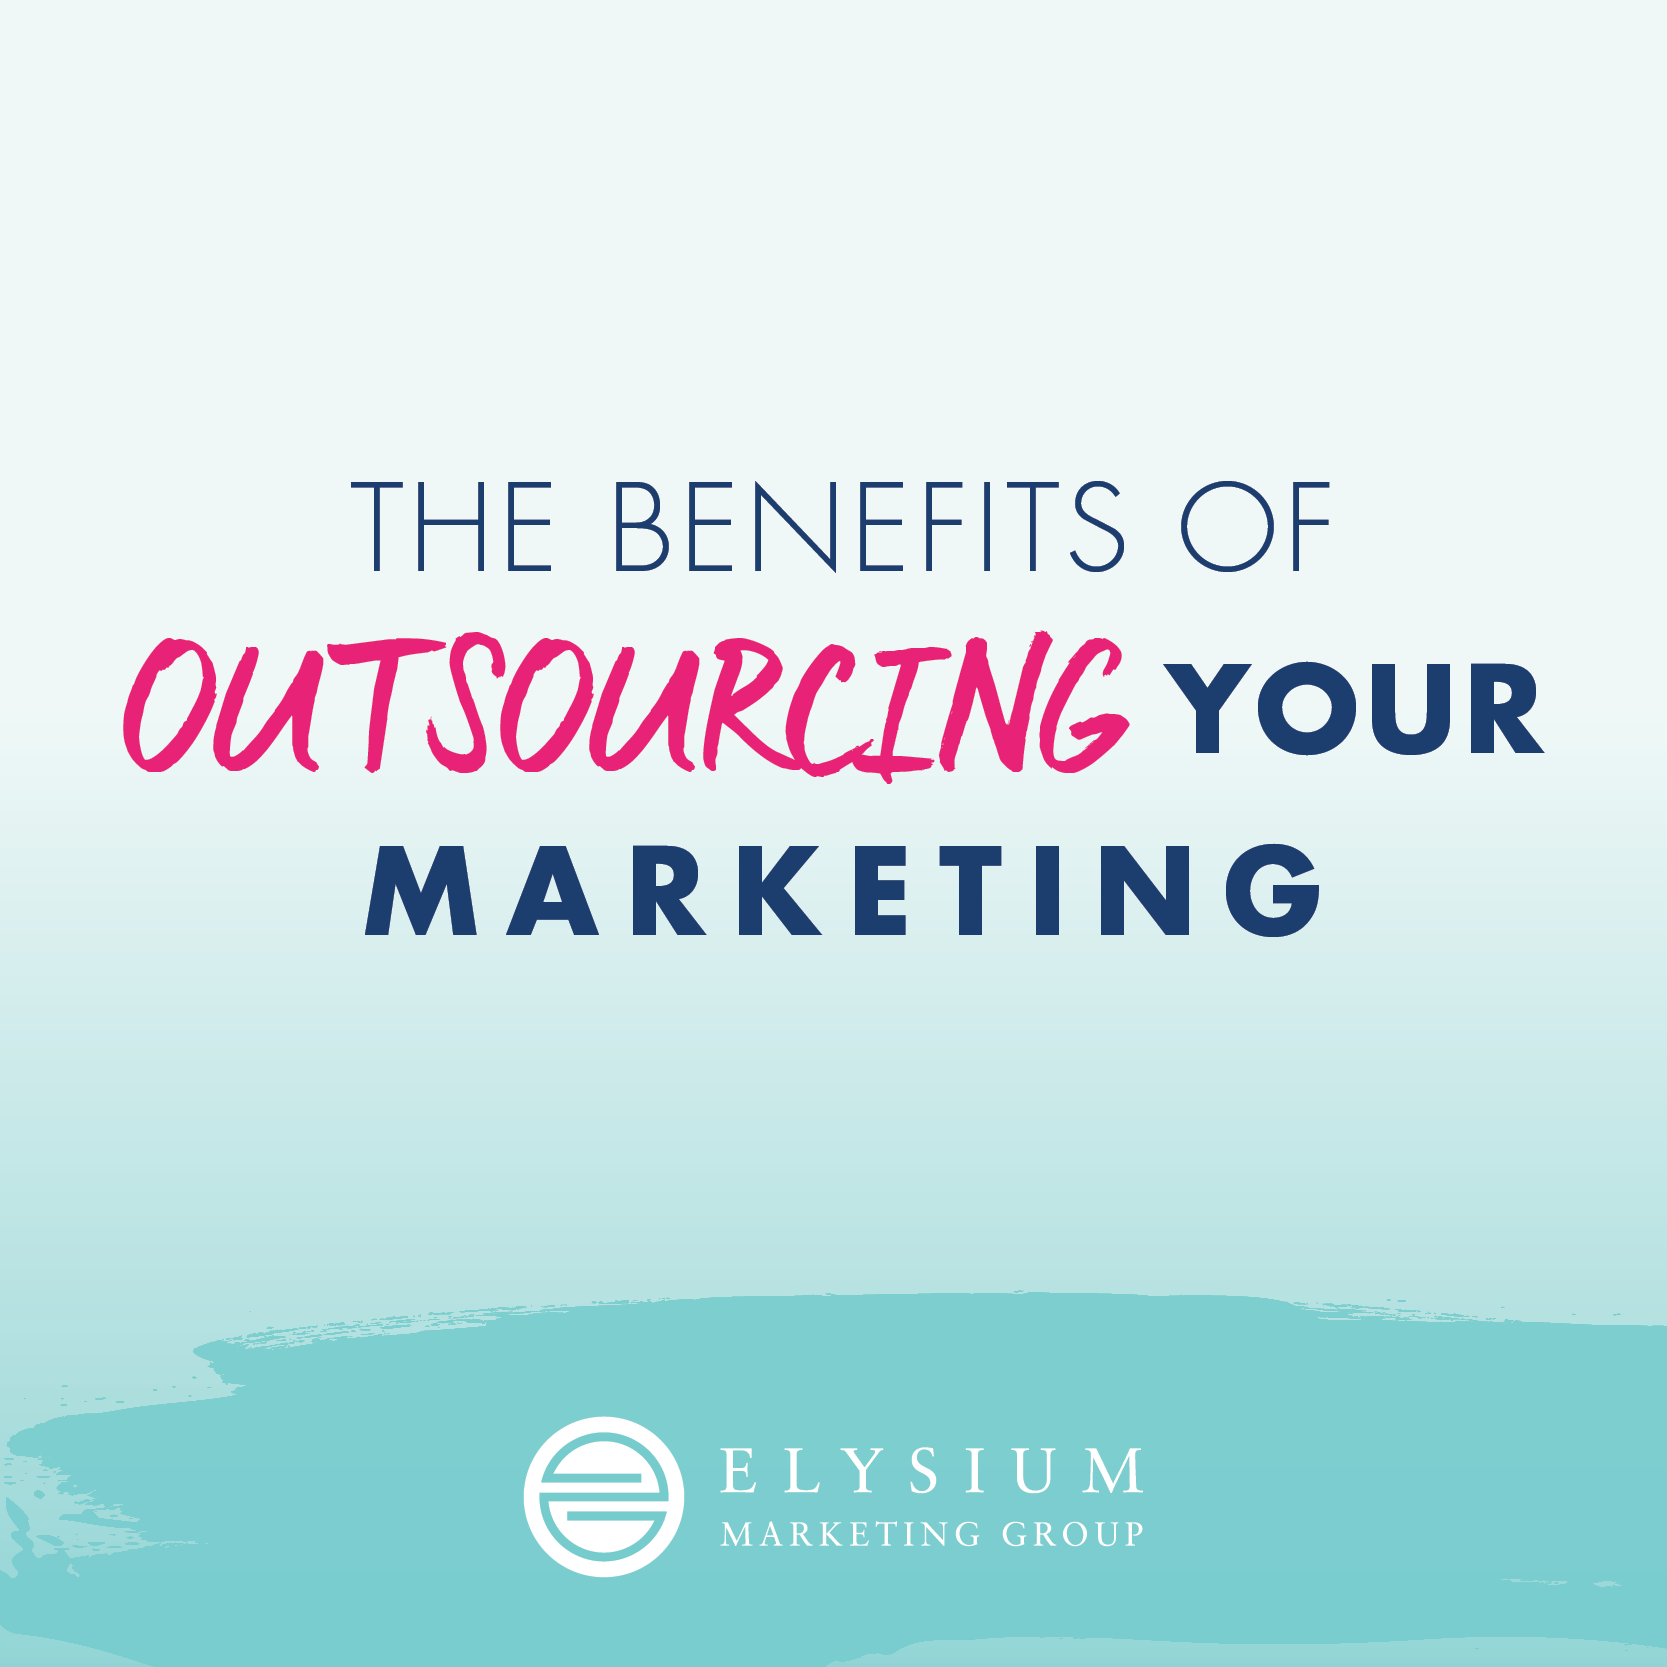 The Benefits of Outsourcing you marketing by Elysium Marketing Group